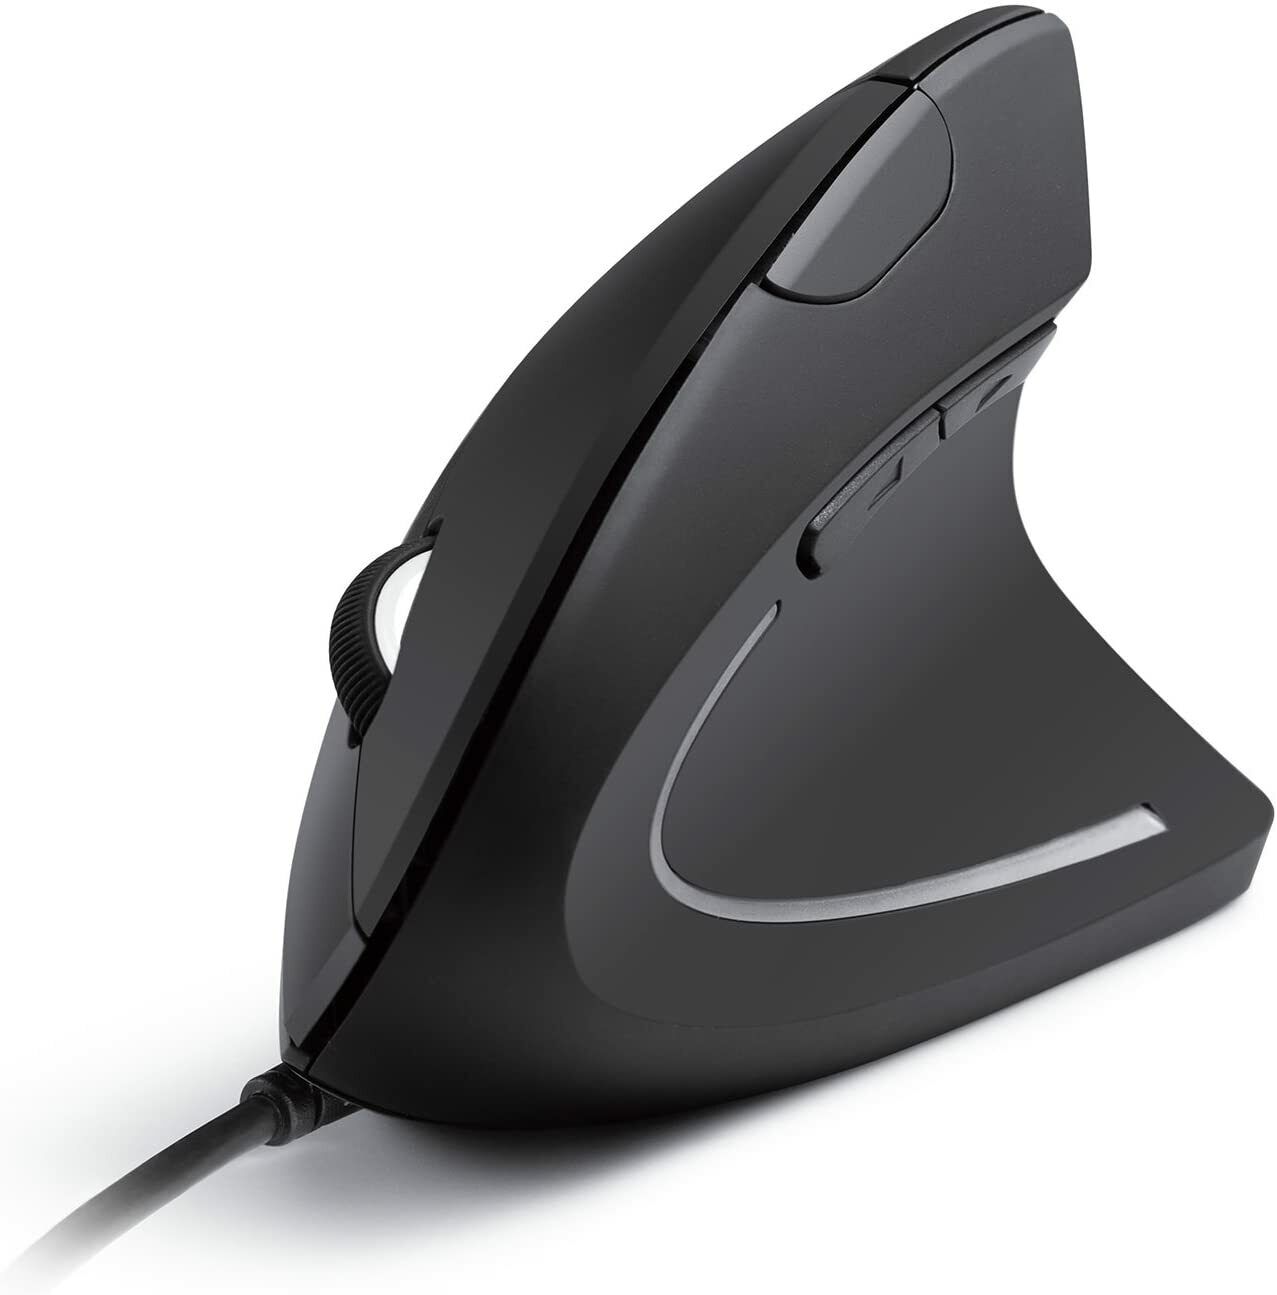 Anker Ergonomic Optical Vertical Mouse 1000/1600 DPI 5 Key Gaming Mice|USB Wired